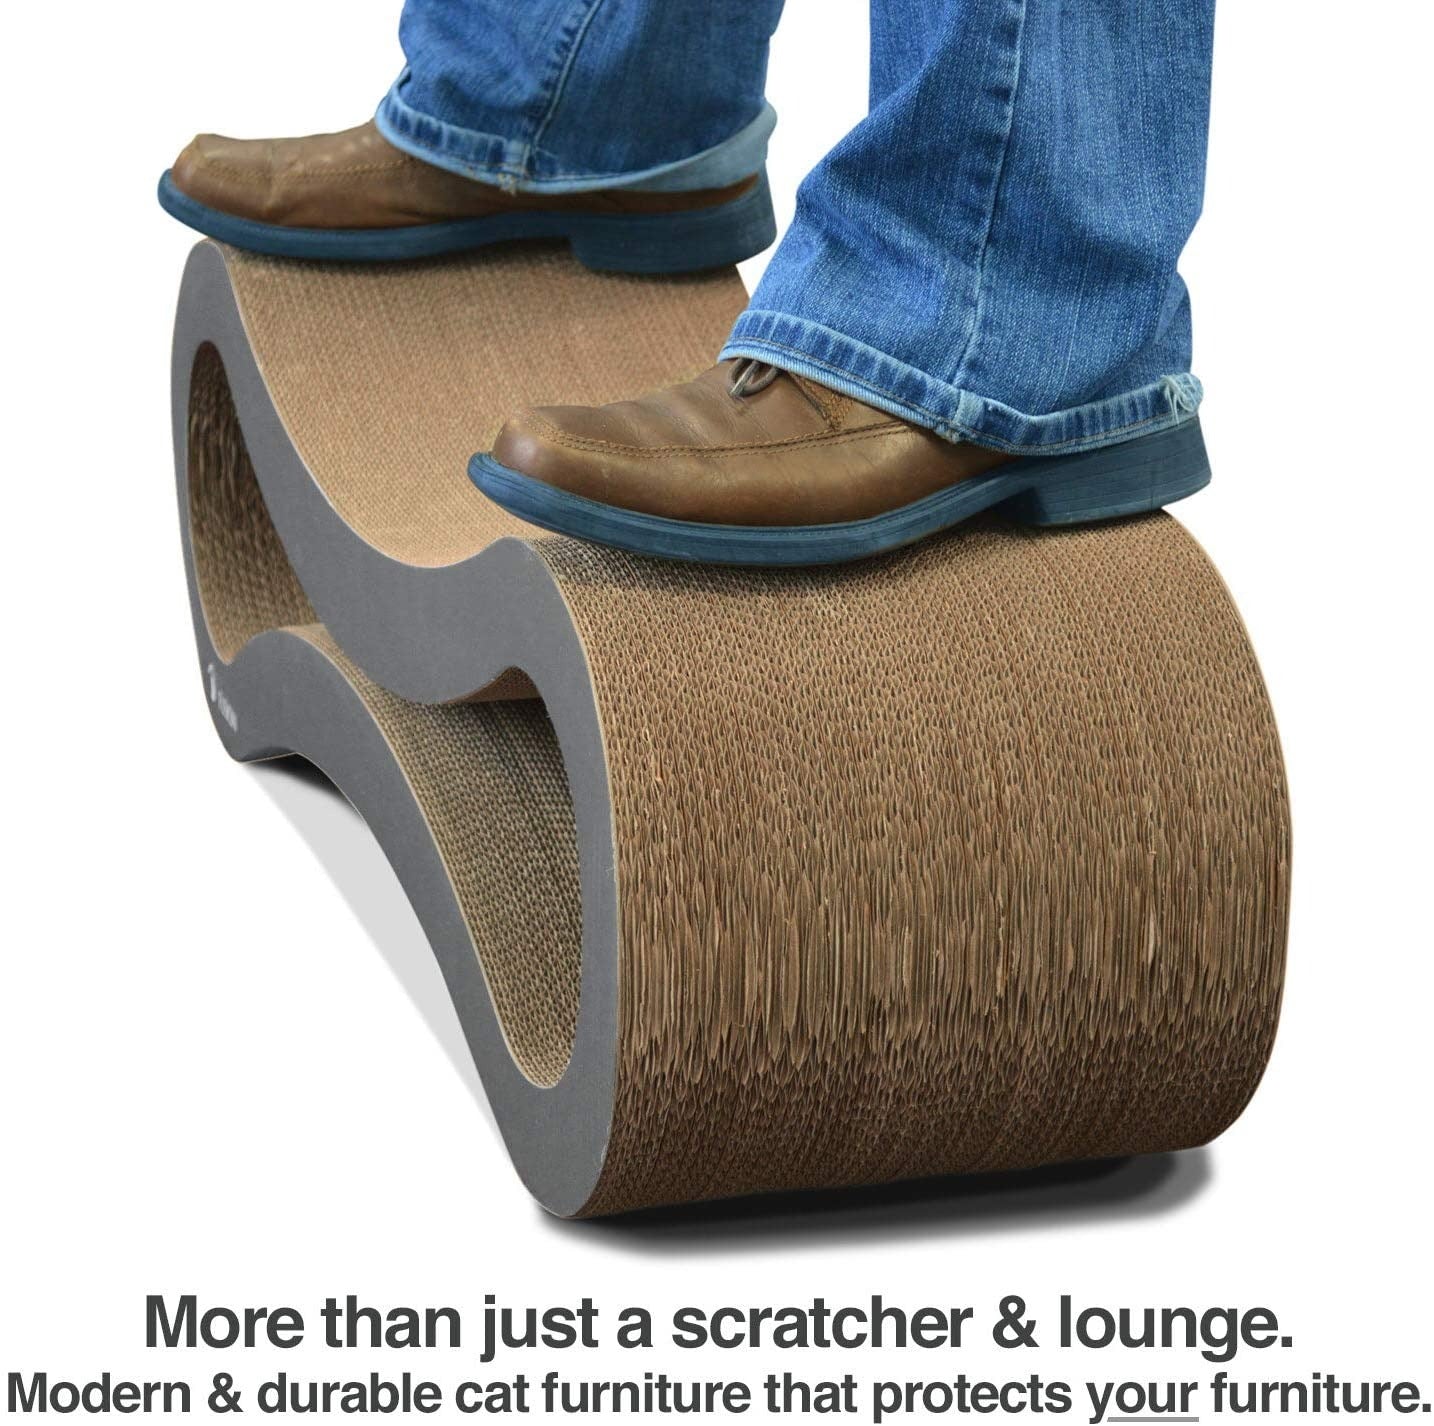 PetFusion Ultimate Cat Scratcher Lounge. Scratch, Play, & Perch! Superior Cardboard & Construction, Significantly Outlasts Cheaper Alternatives.